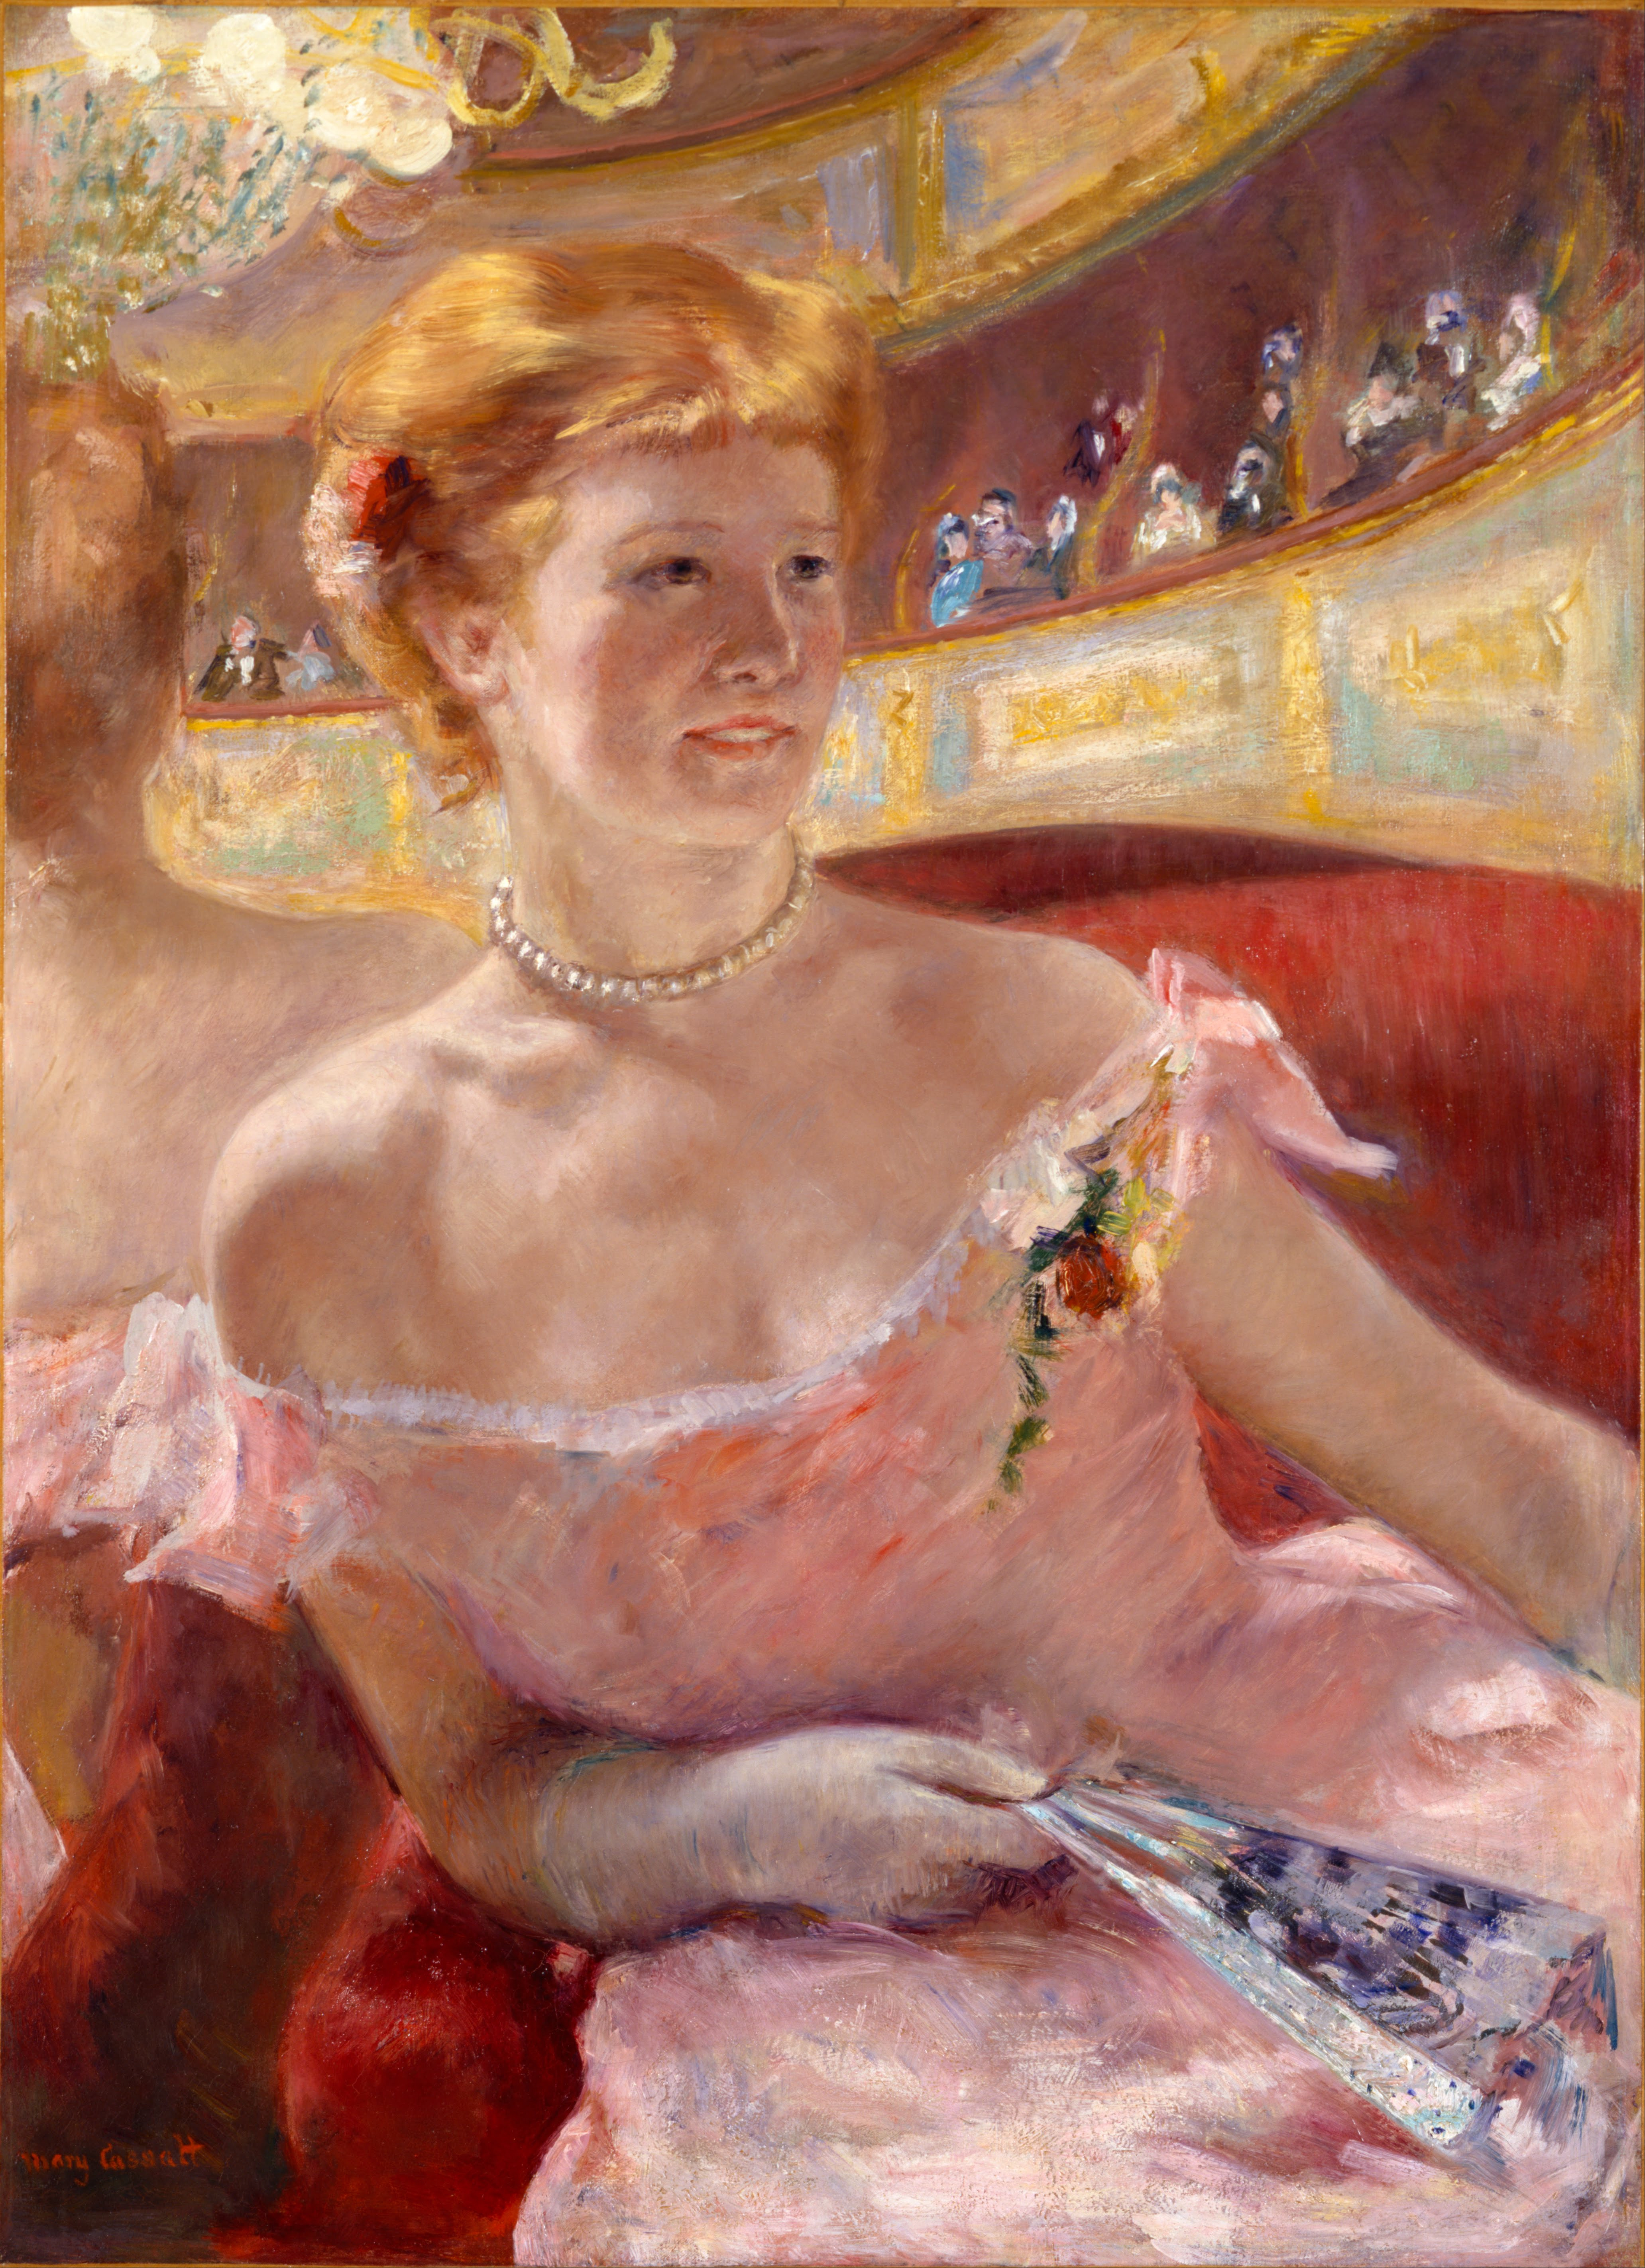 Woman with a Pearl Necklace in a Loge by Mary Cassatt - 1879 - 81.3 x 59.7 cm Philadelphia Museum of Art